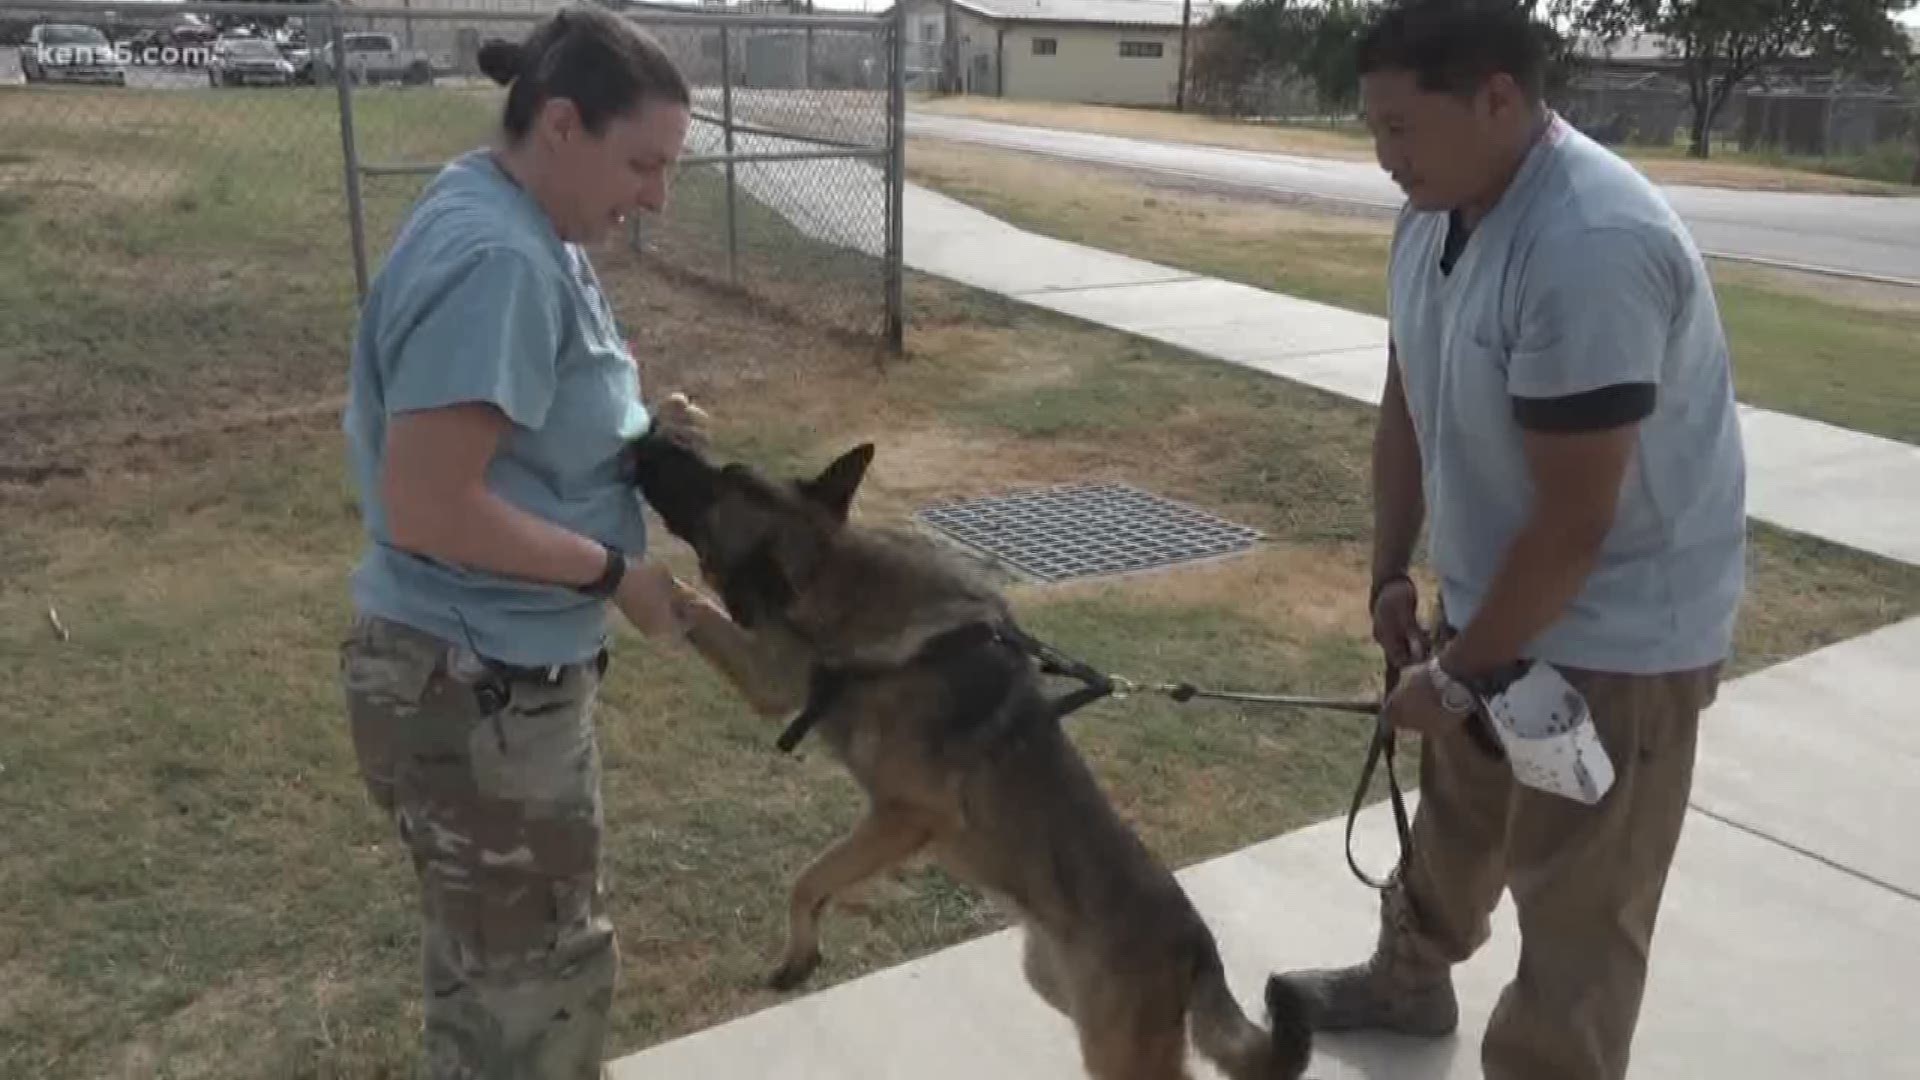 Dr. Walter Burghardt is set to retire after more than two decades of working with military dogs.